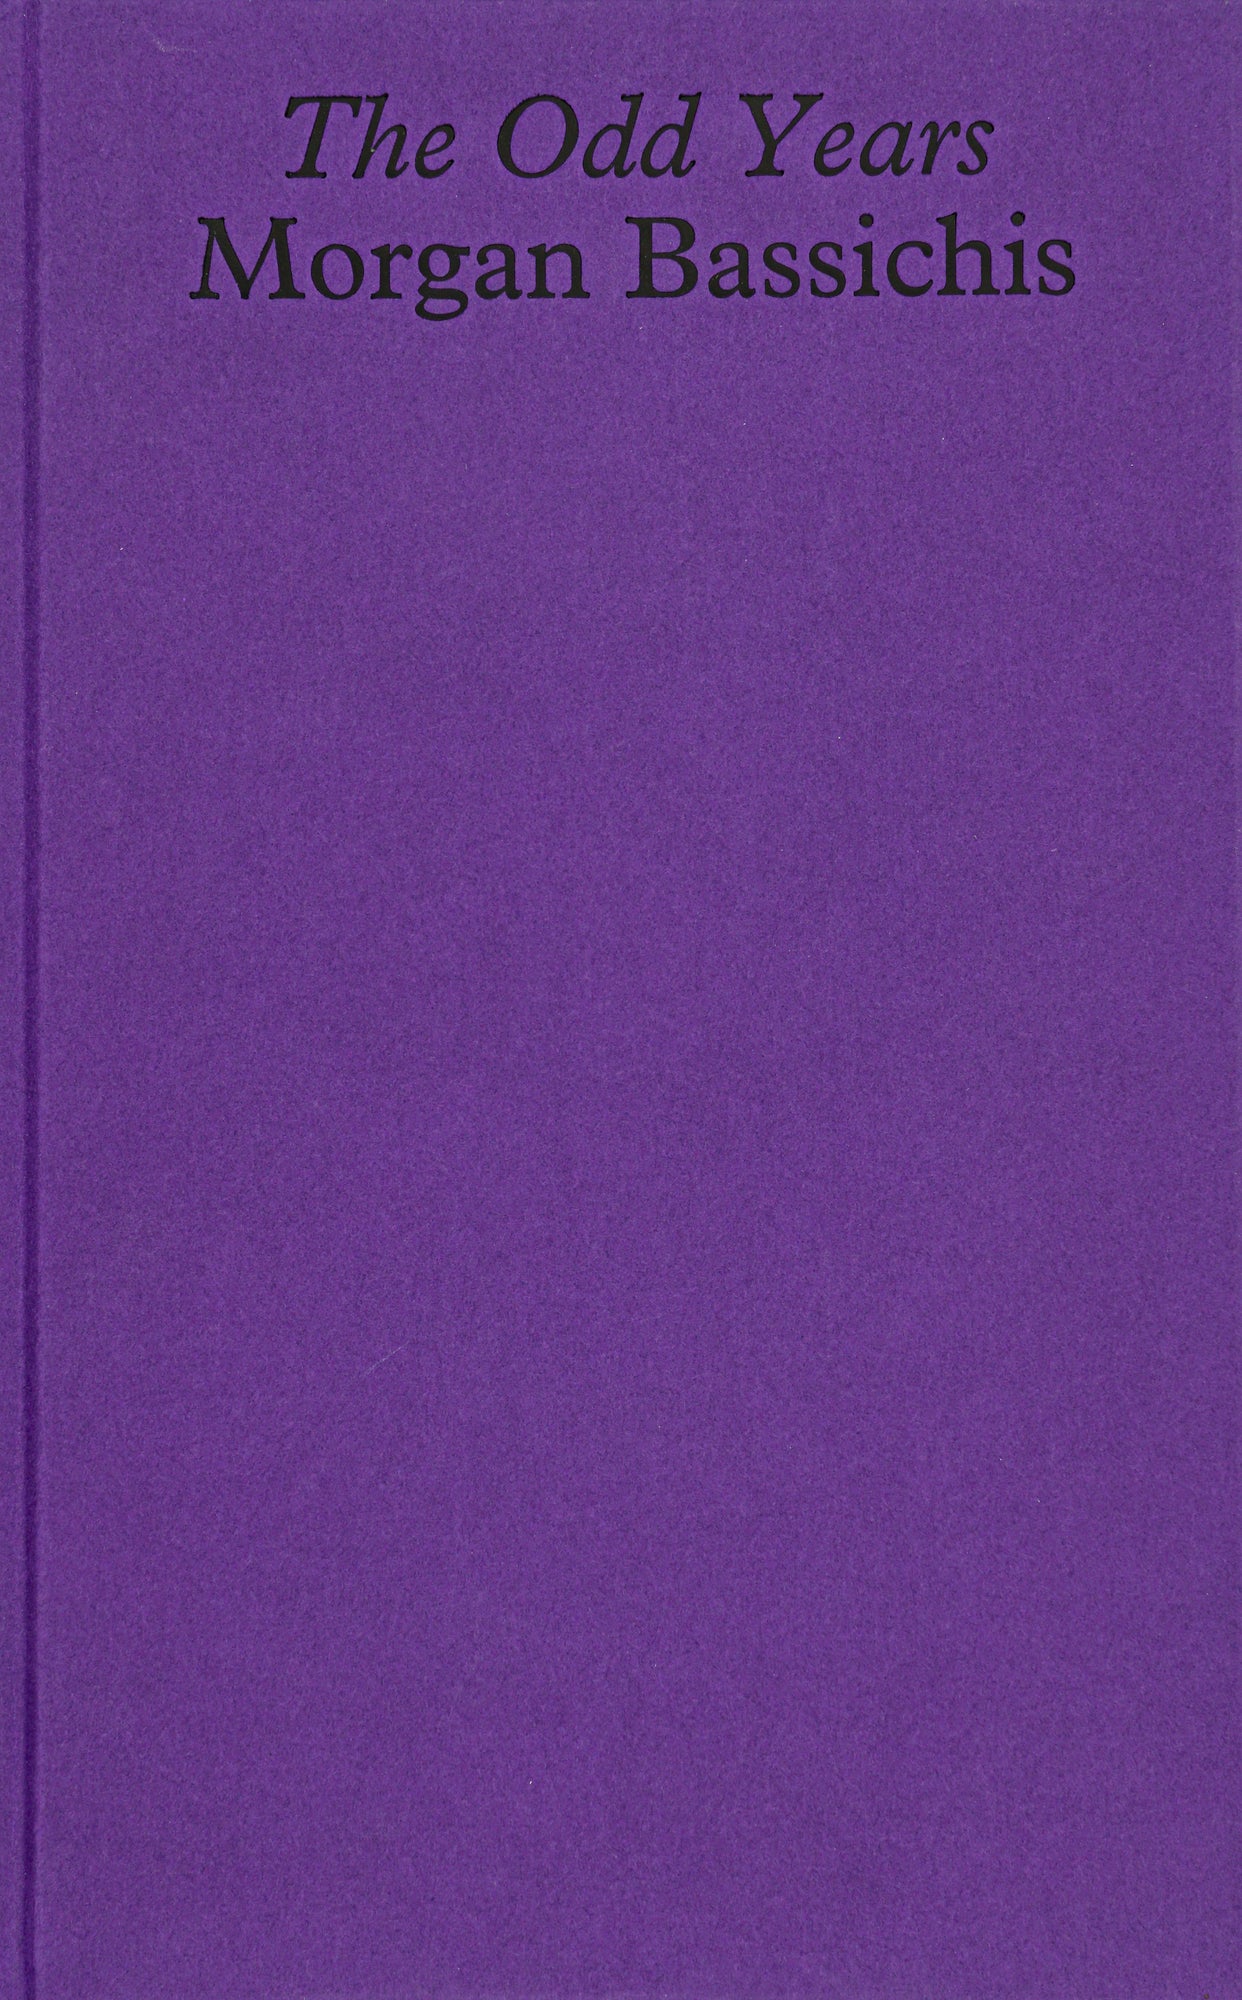 Purple book cover with the title written in italics, underneath which the author is written.